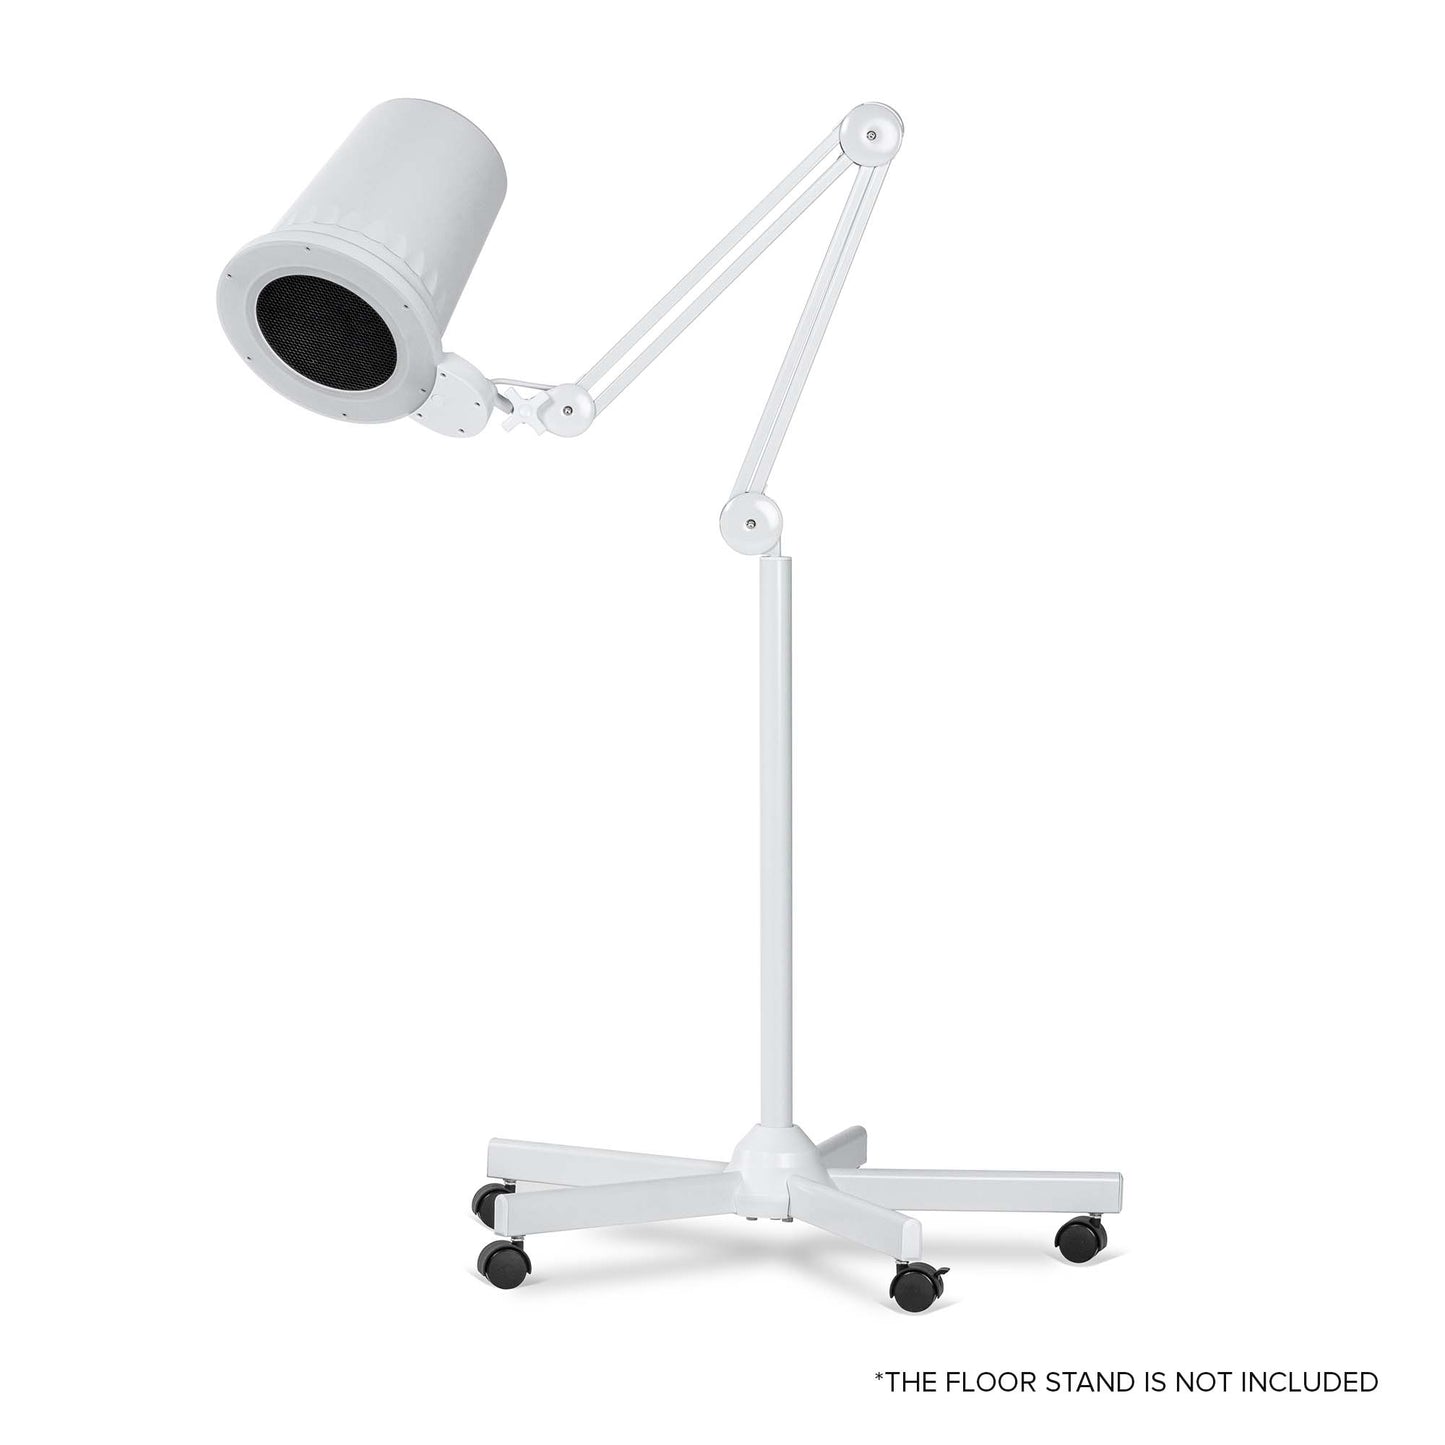 Alize nail dust collector with table mount